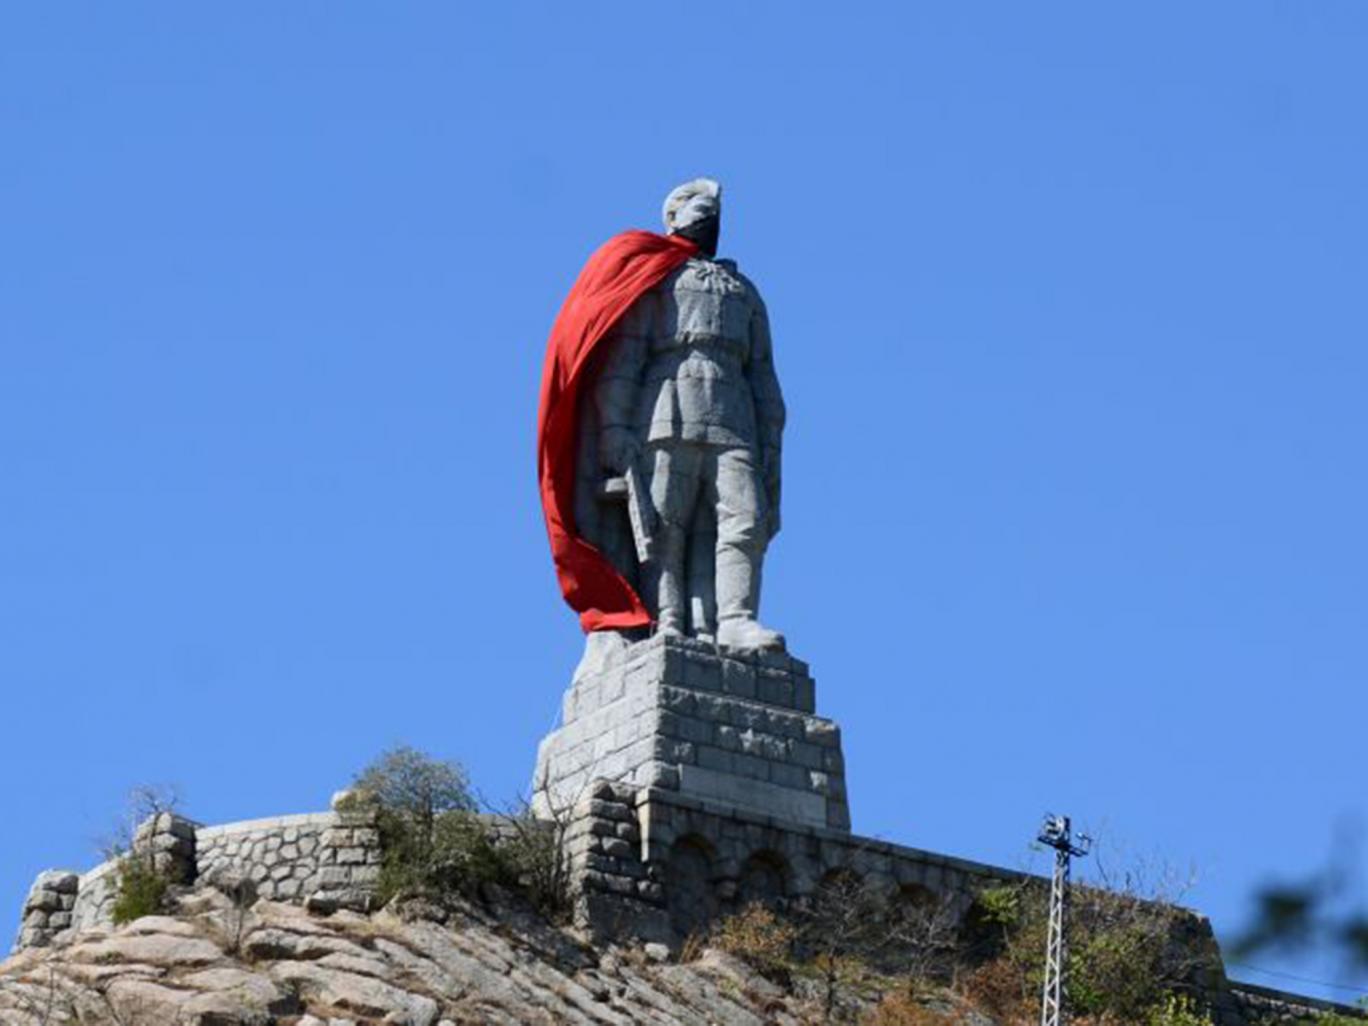 A 10.5-meter high monument of a Soviet soldier draped with a red cloak in the Bulgarian city of Plovdiv Getty 